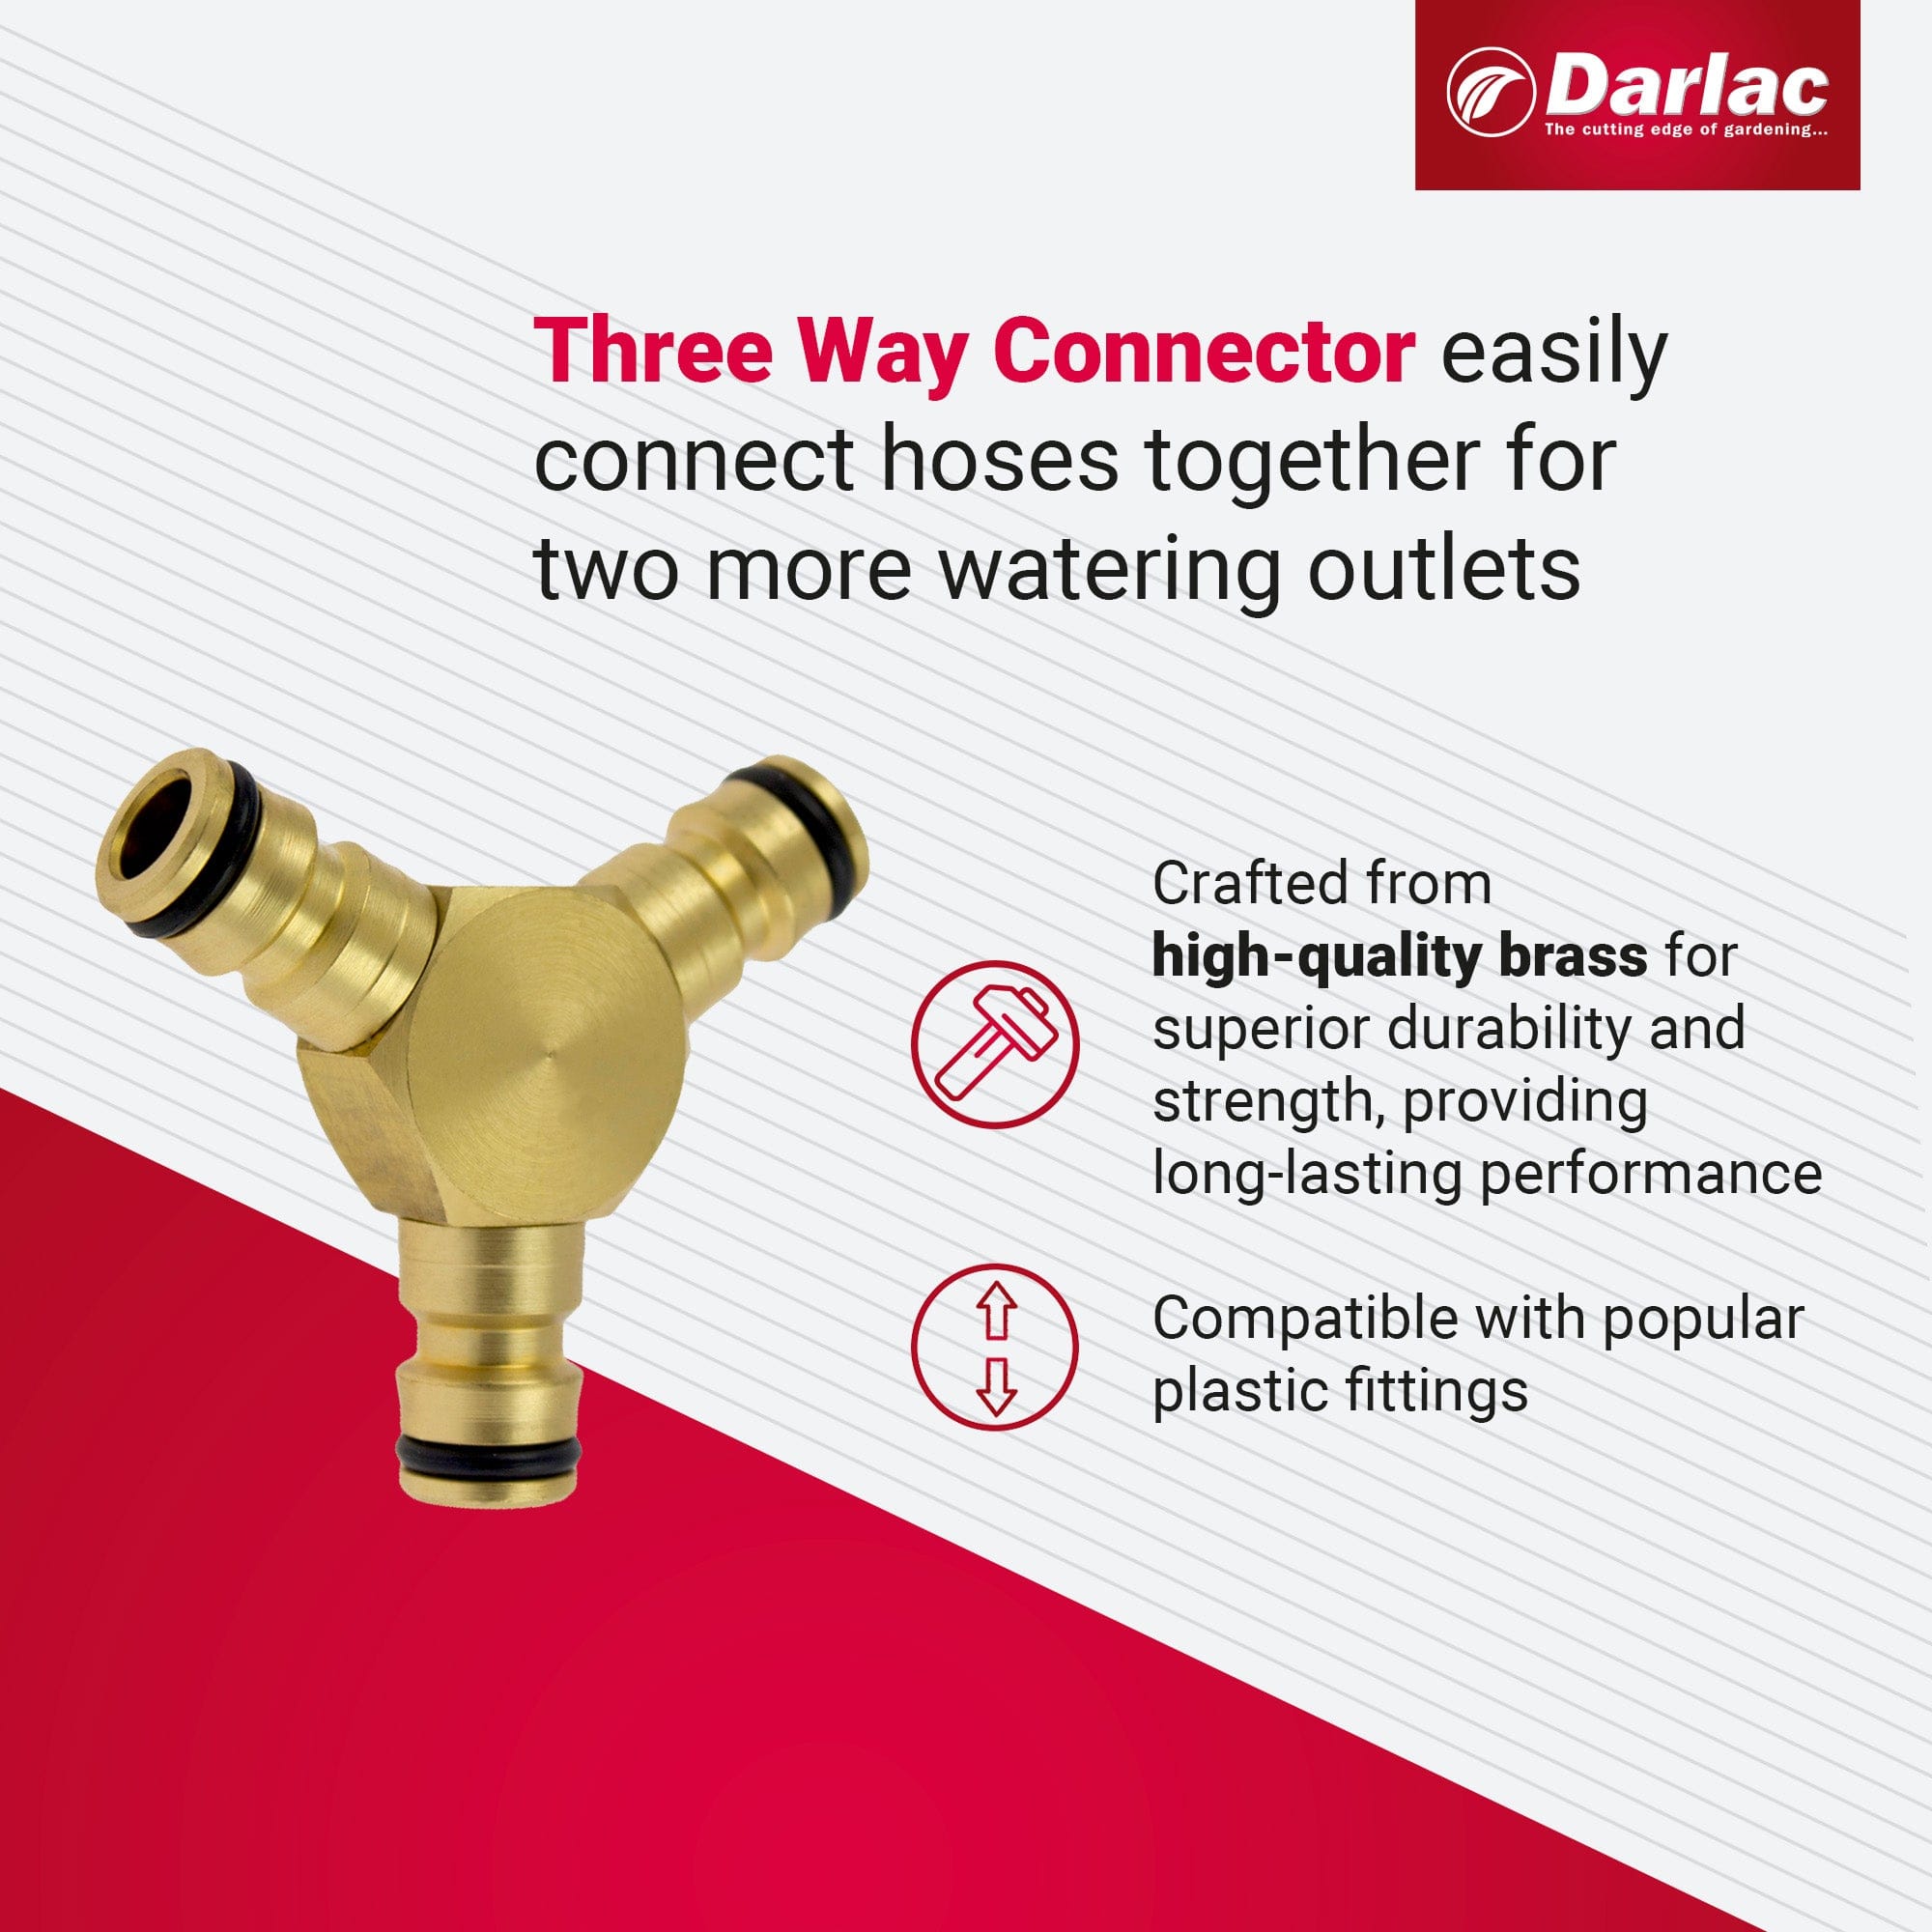 dt-brown HARDWARE Darlac Three Way Connector